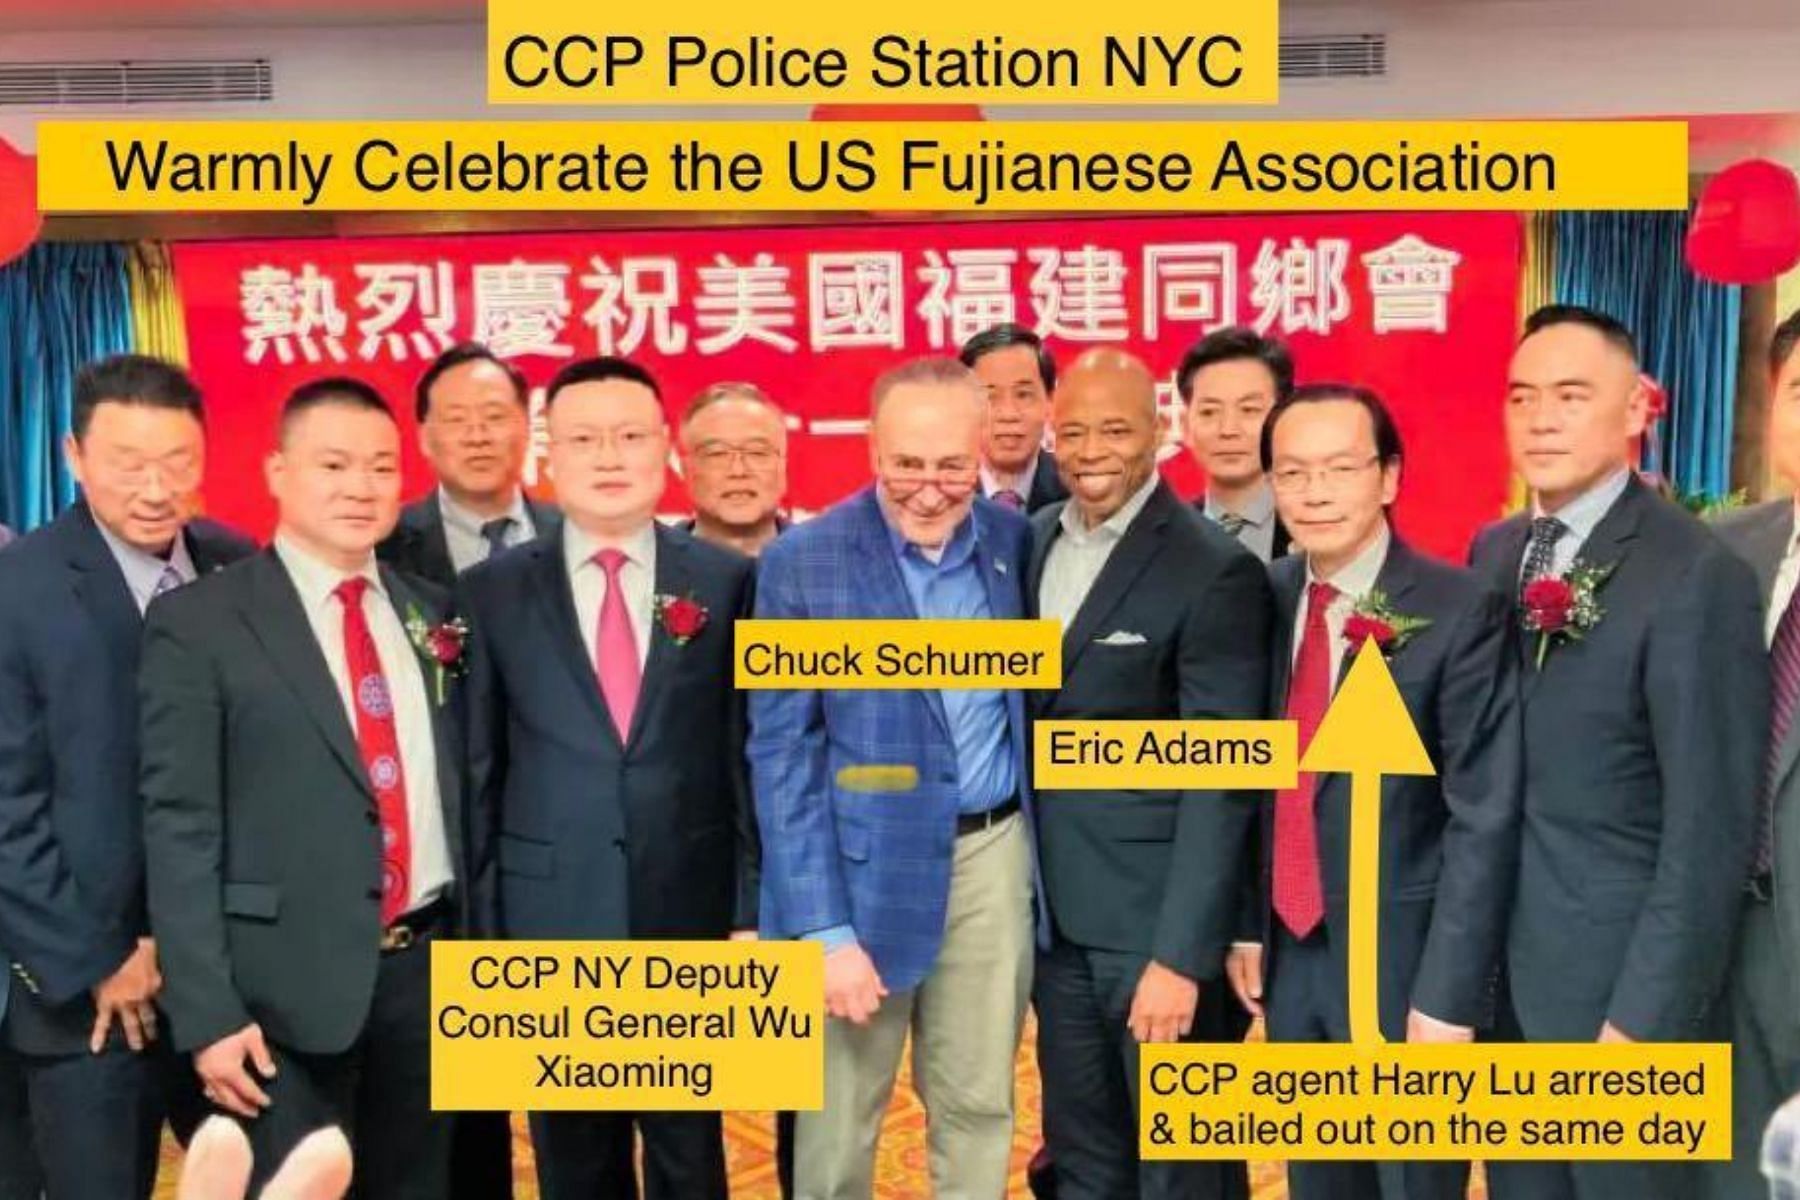 Harry Lu was pictured with Eric Adams and Chuck Schumer (Image via Twitter/@ChuckCallesto)